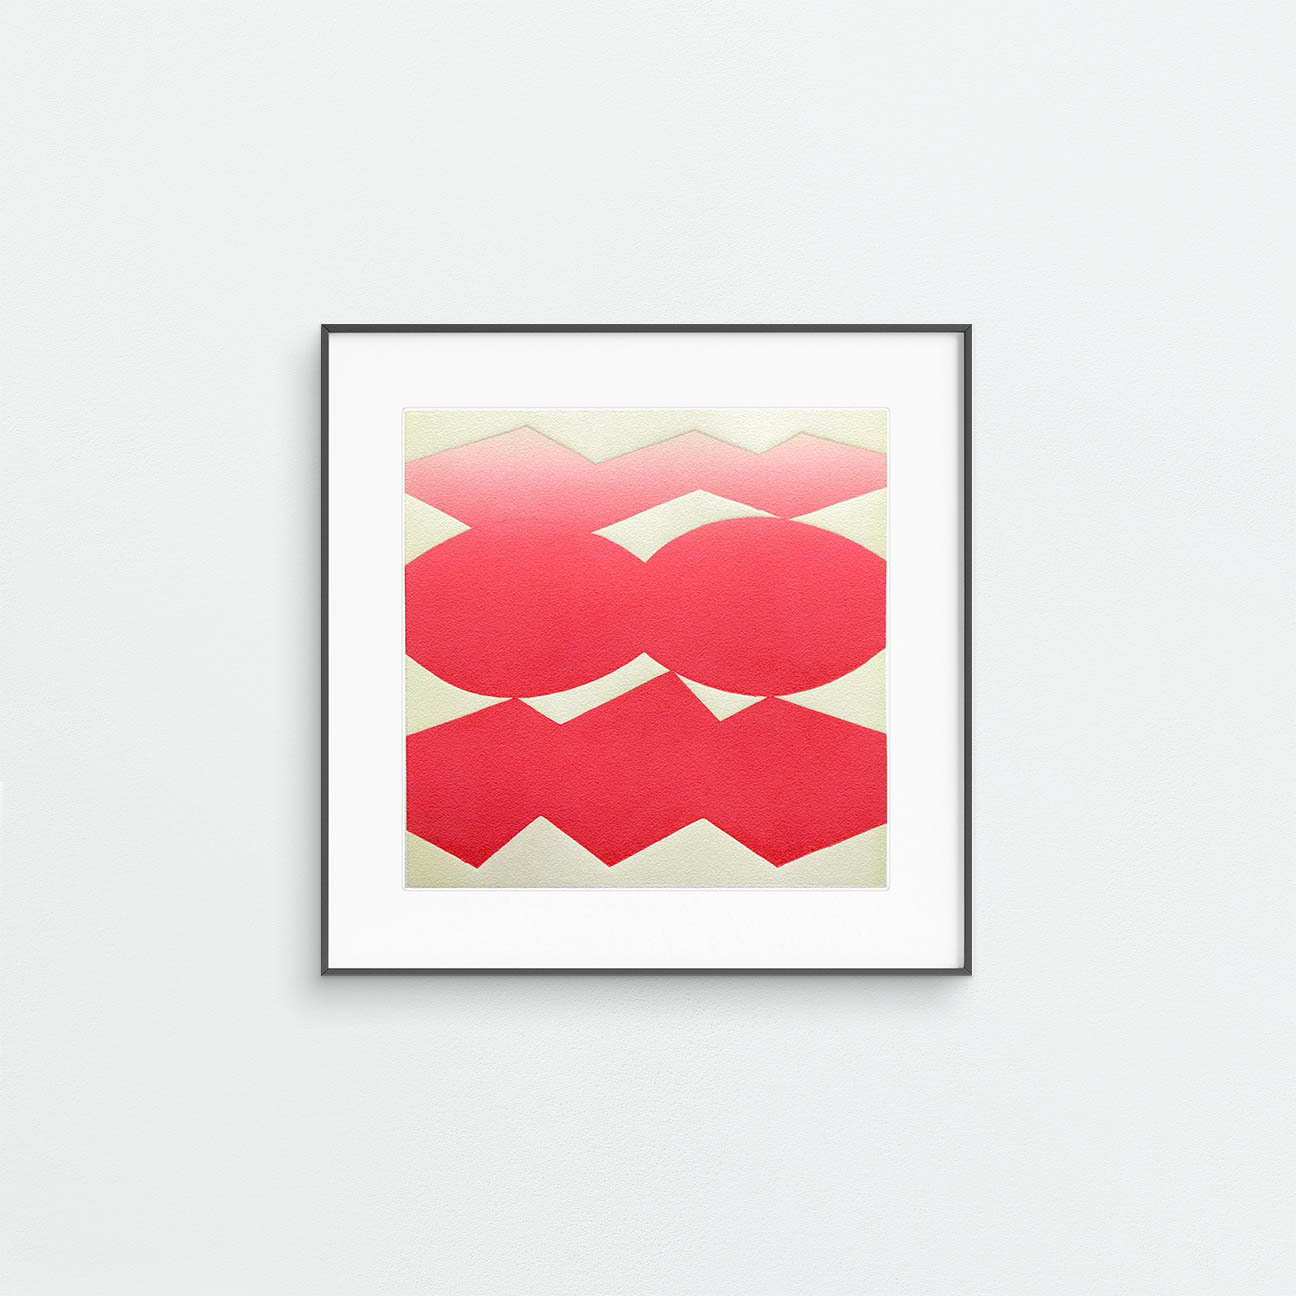 Woodcut art prints on Woodcut art prints on Fabriano paper, styled minimalist in Geometric abstractionFabriano paper, styled minimalist in Geometric abstraction, art by Narit Tananon